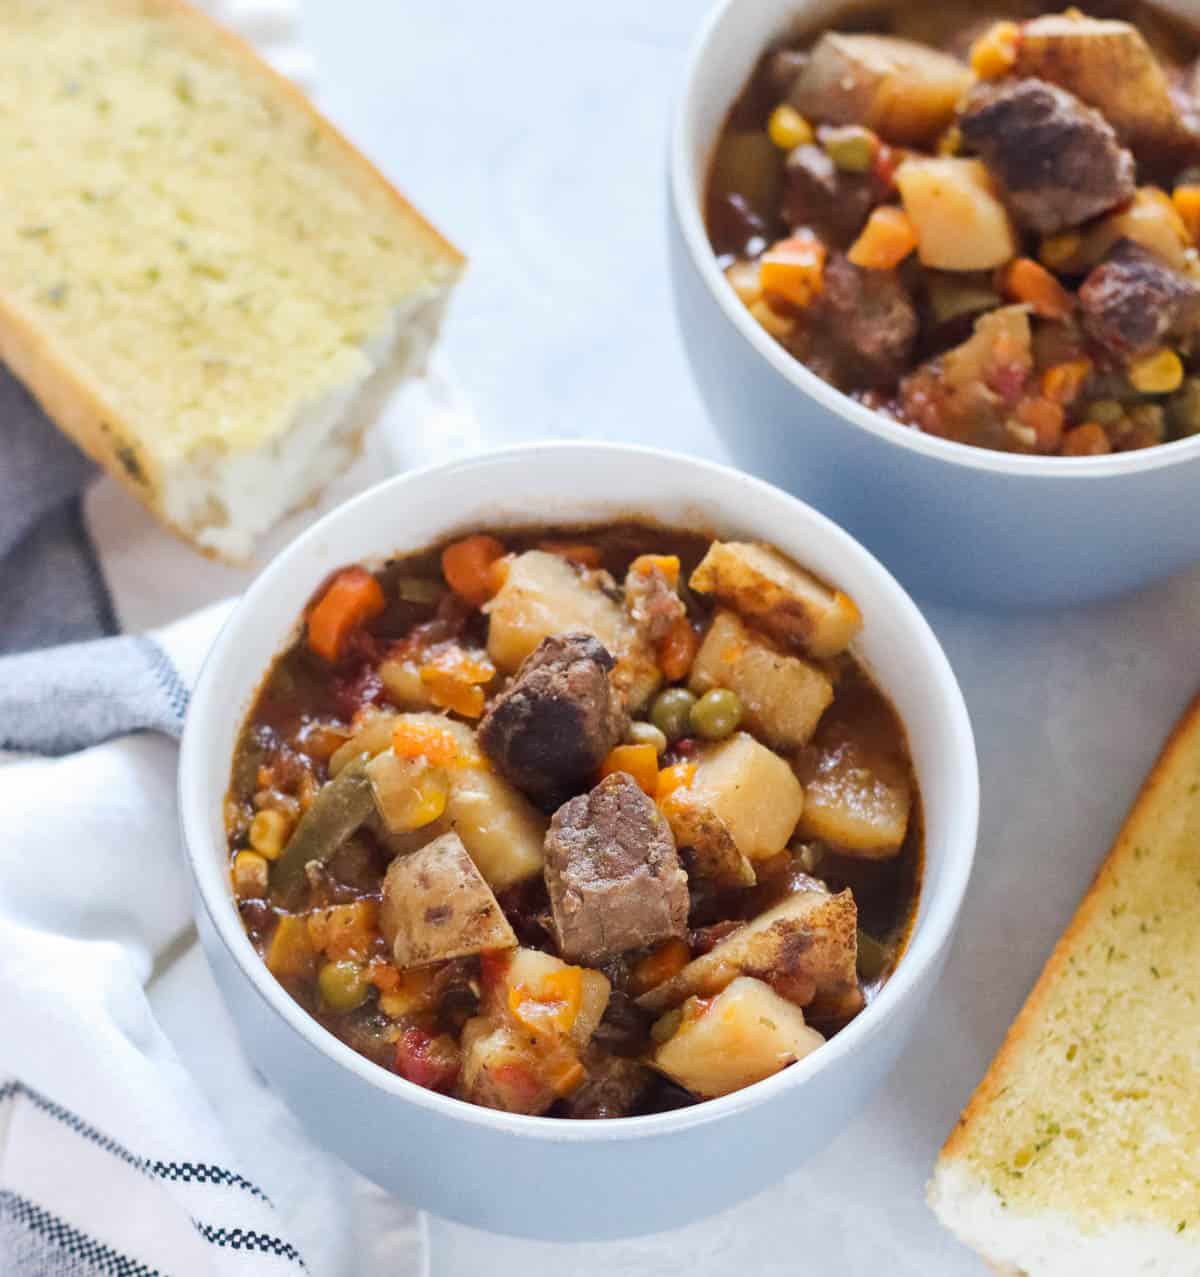 bowls with soup made with potatoes, beef, and vegetables next to a white and black napkin and garlic bread